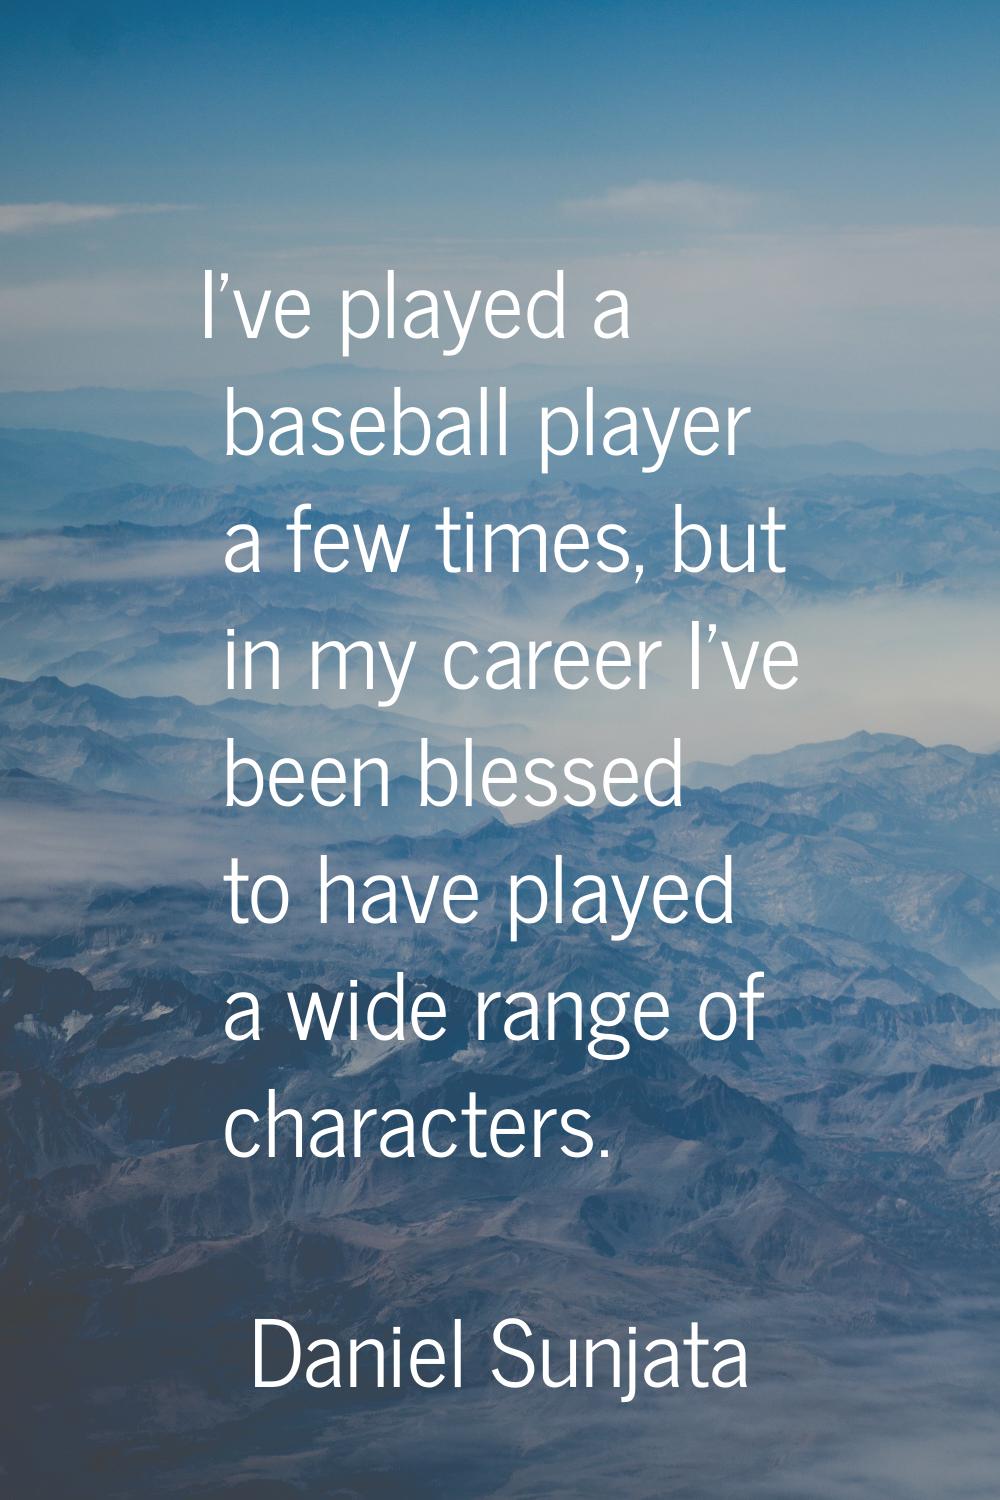 I've played a baseball player a few times, but in my career I've been blessed to have played a wide